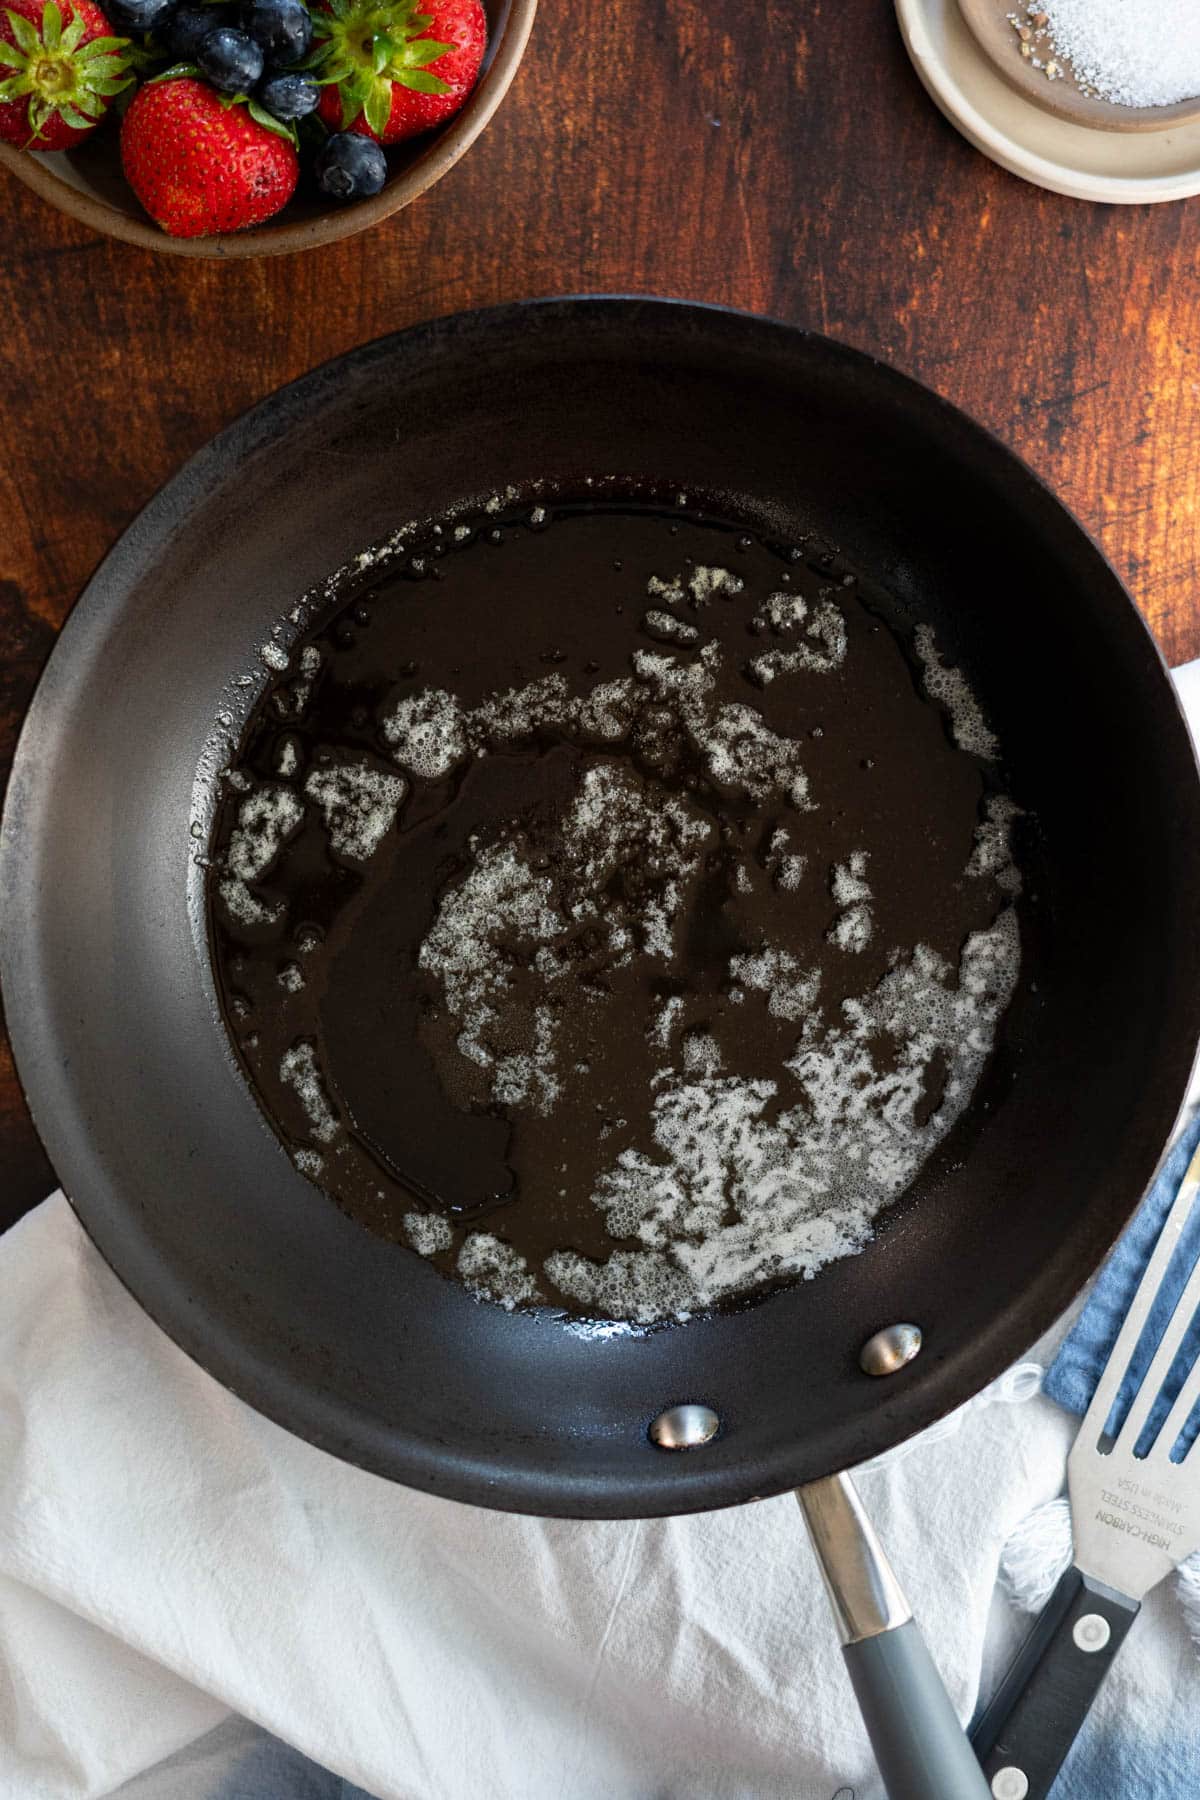 Melting butter in a non stick skillet.